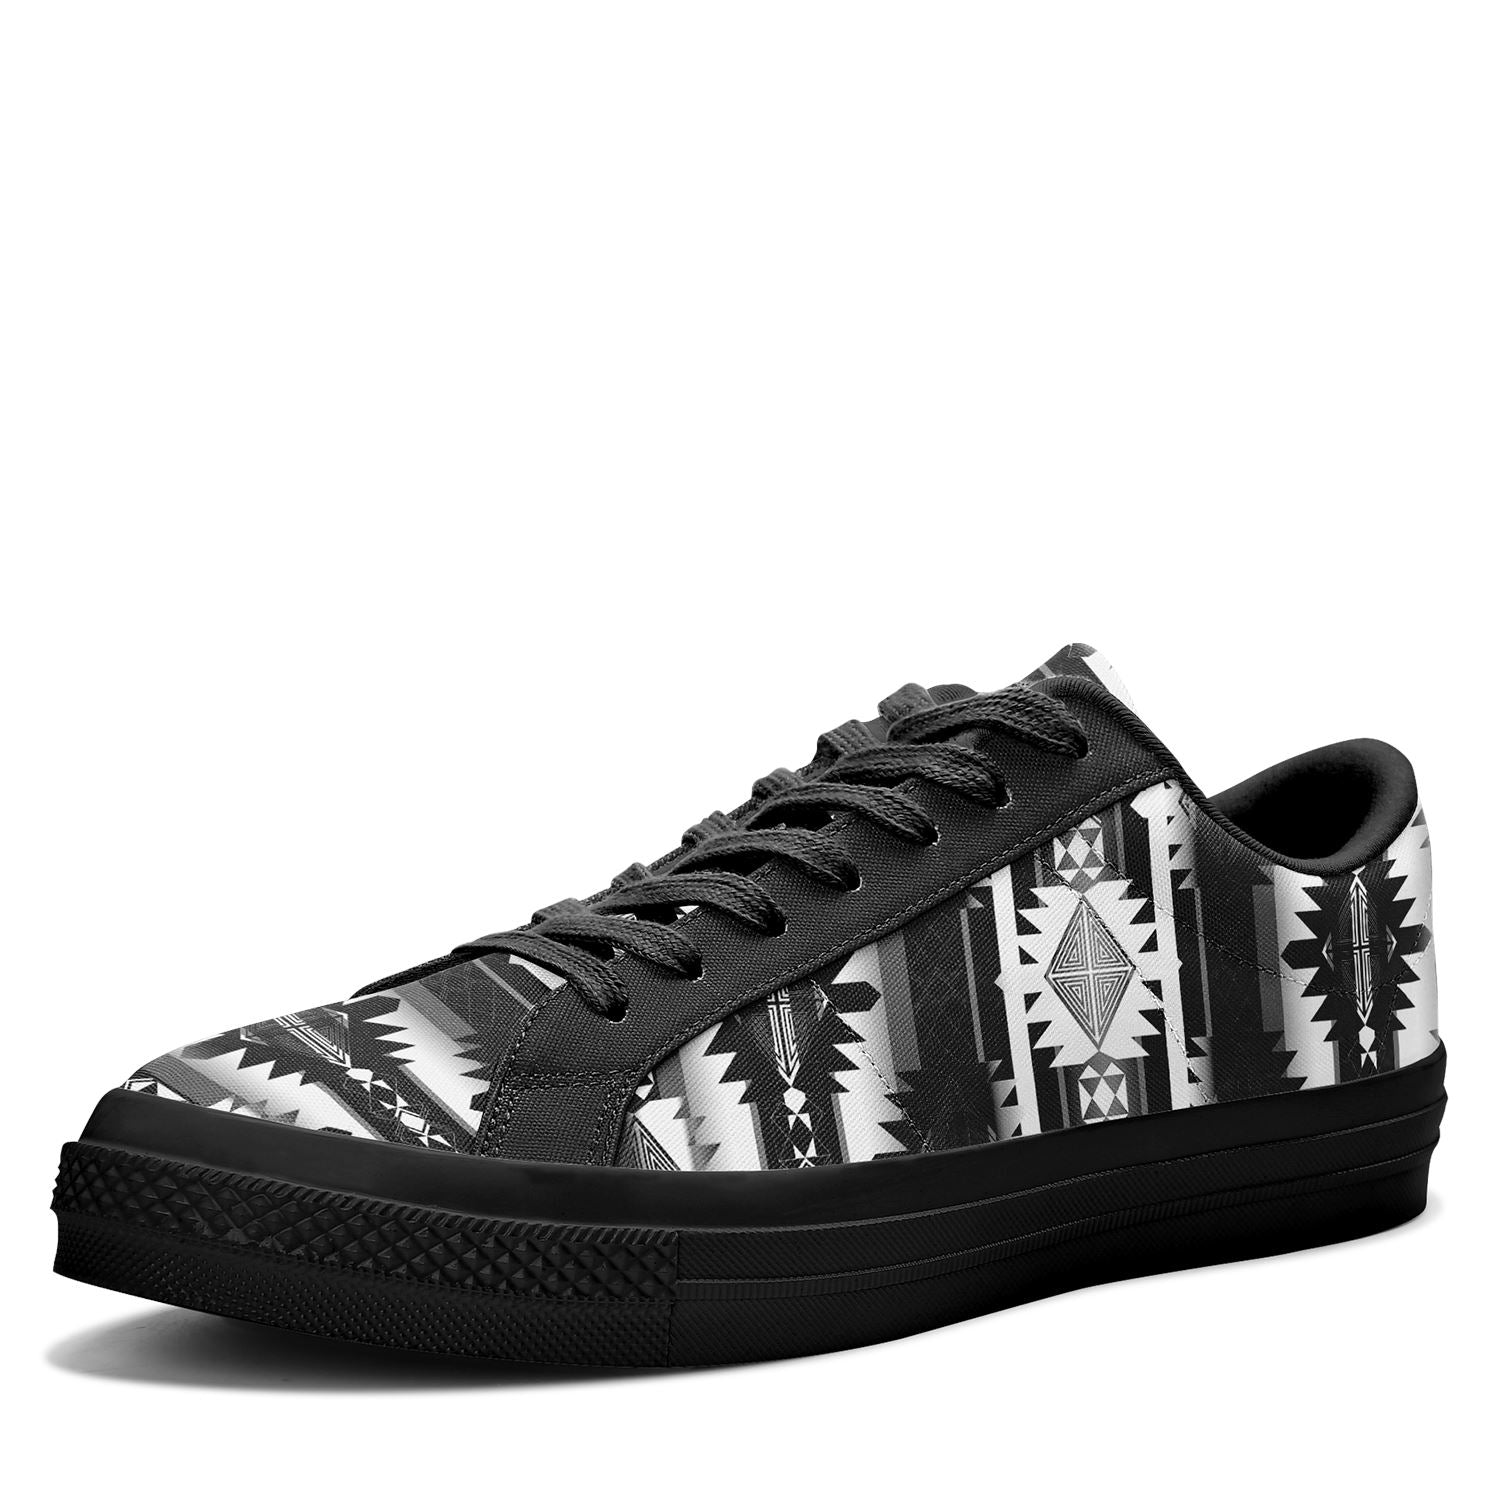 Okotoks Black and White Aapisi Low Top Canvas Shoes Black Sole 49 Dzine 